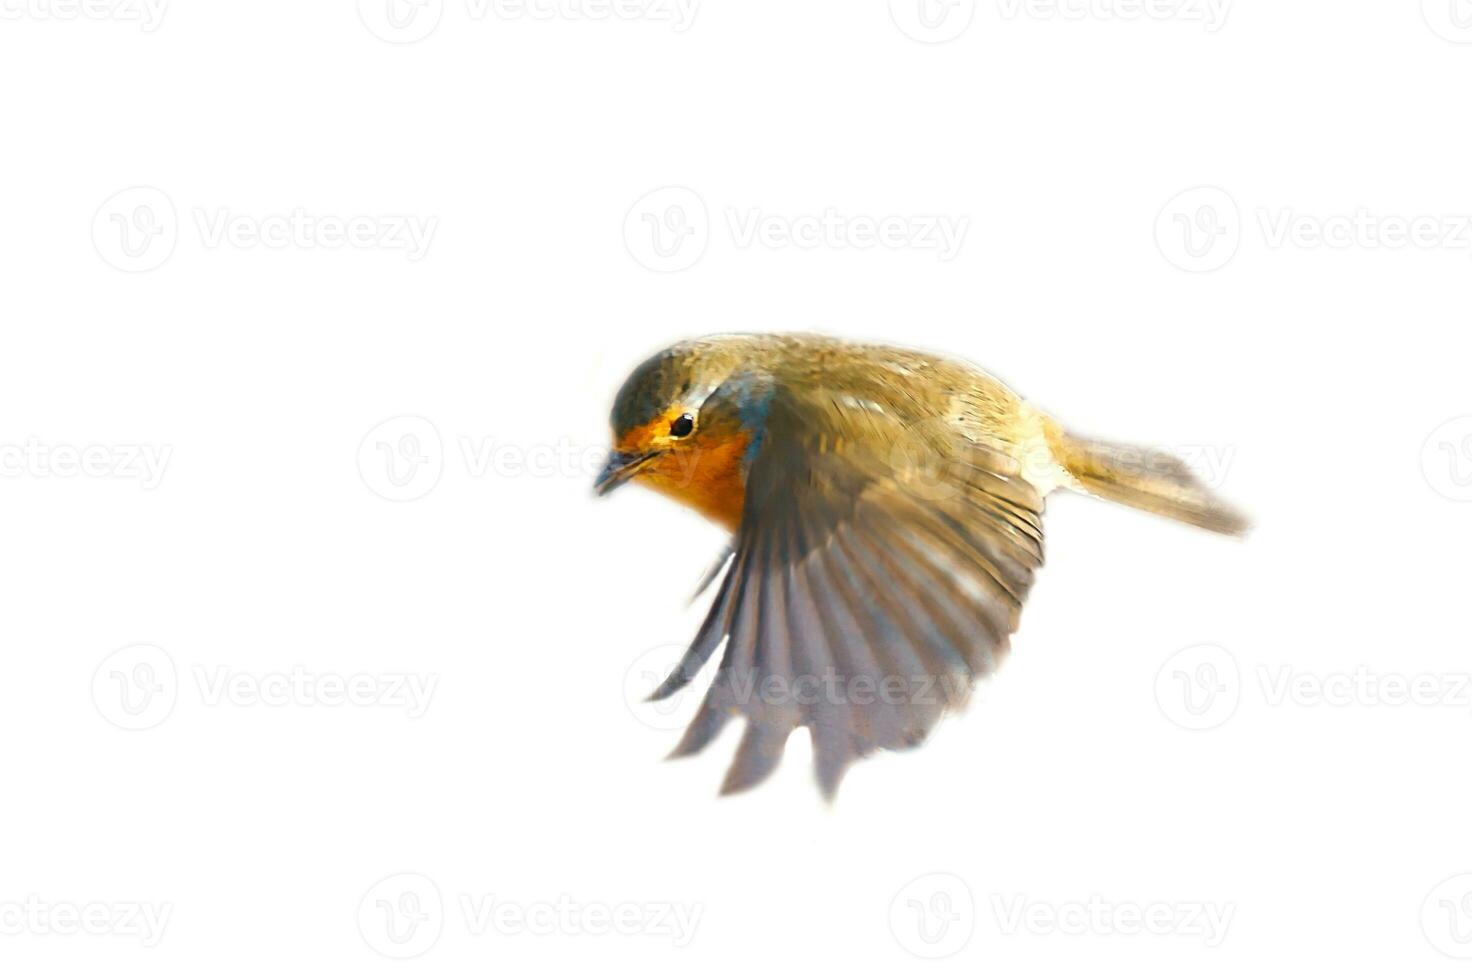 robin in flight, isolated, cropped for editing. Songbird with white orange plumage photo